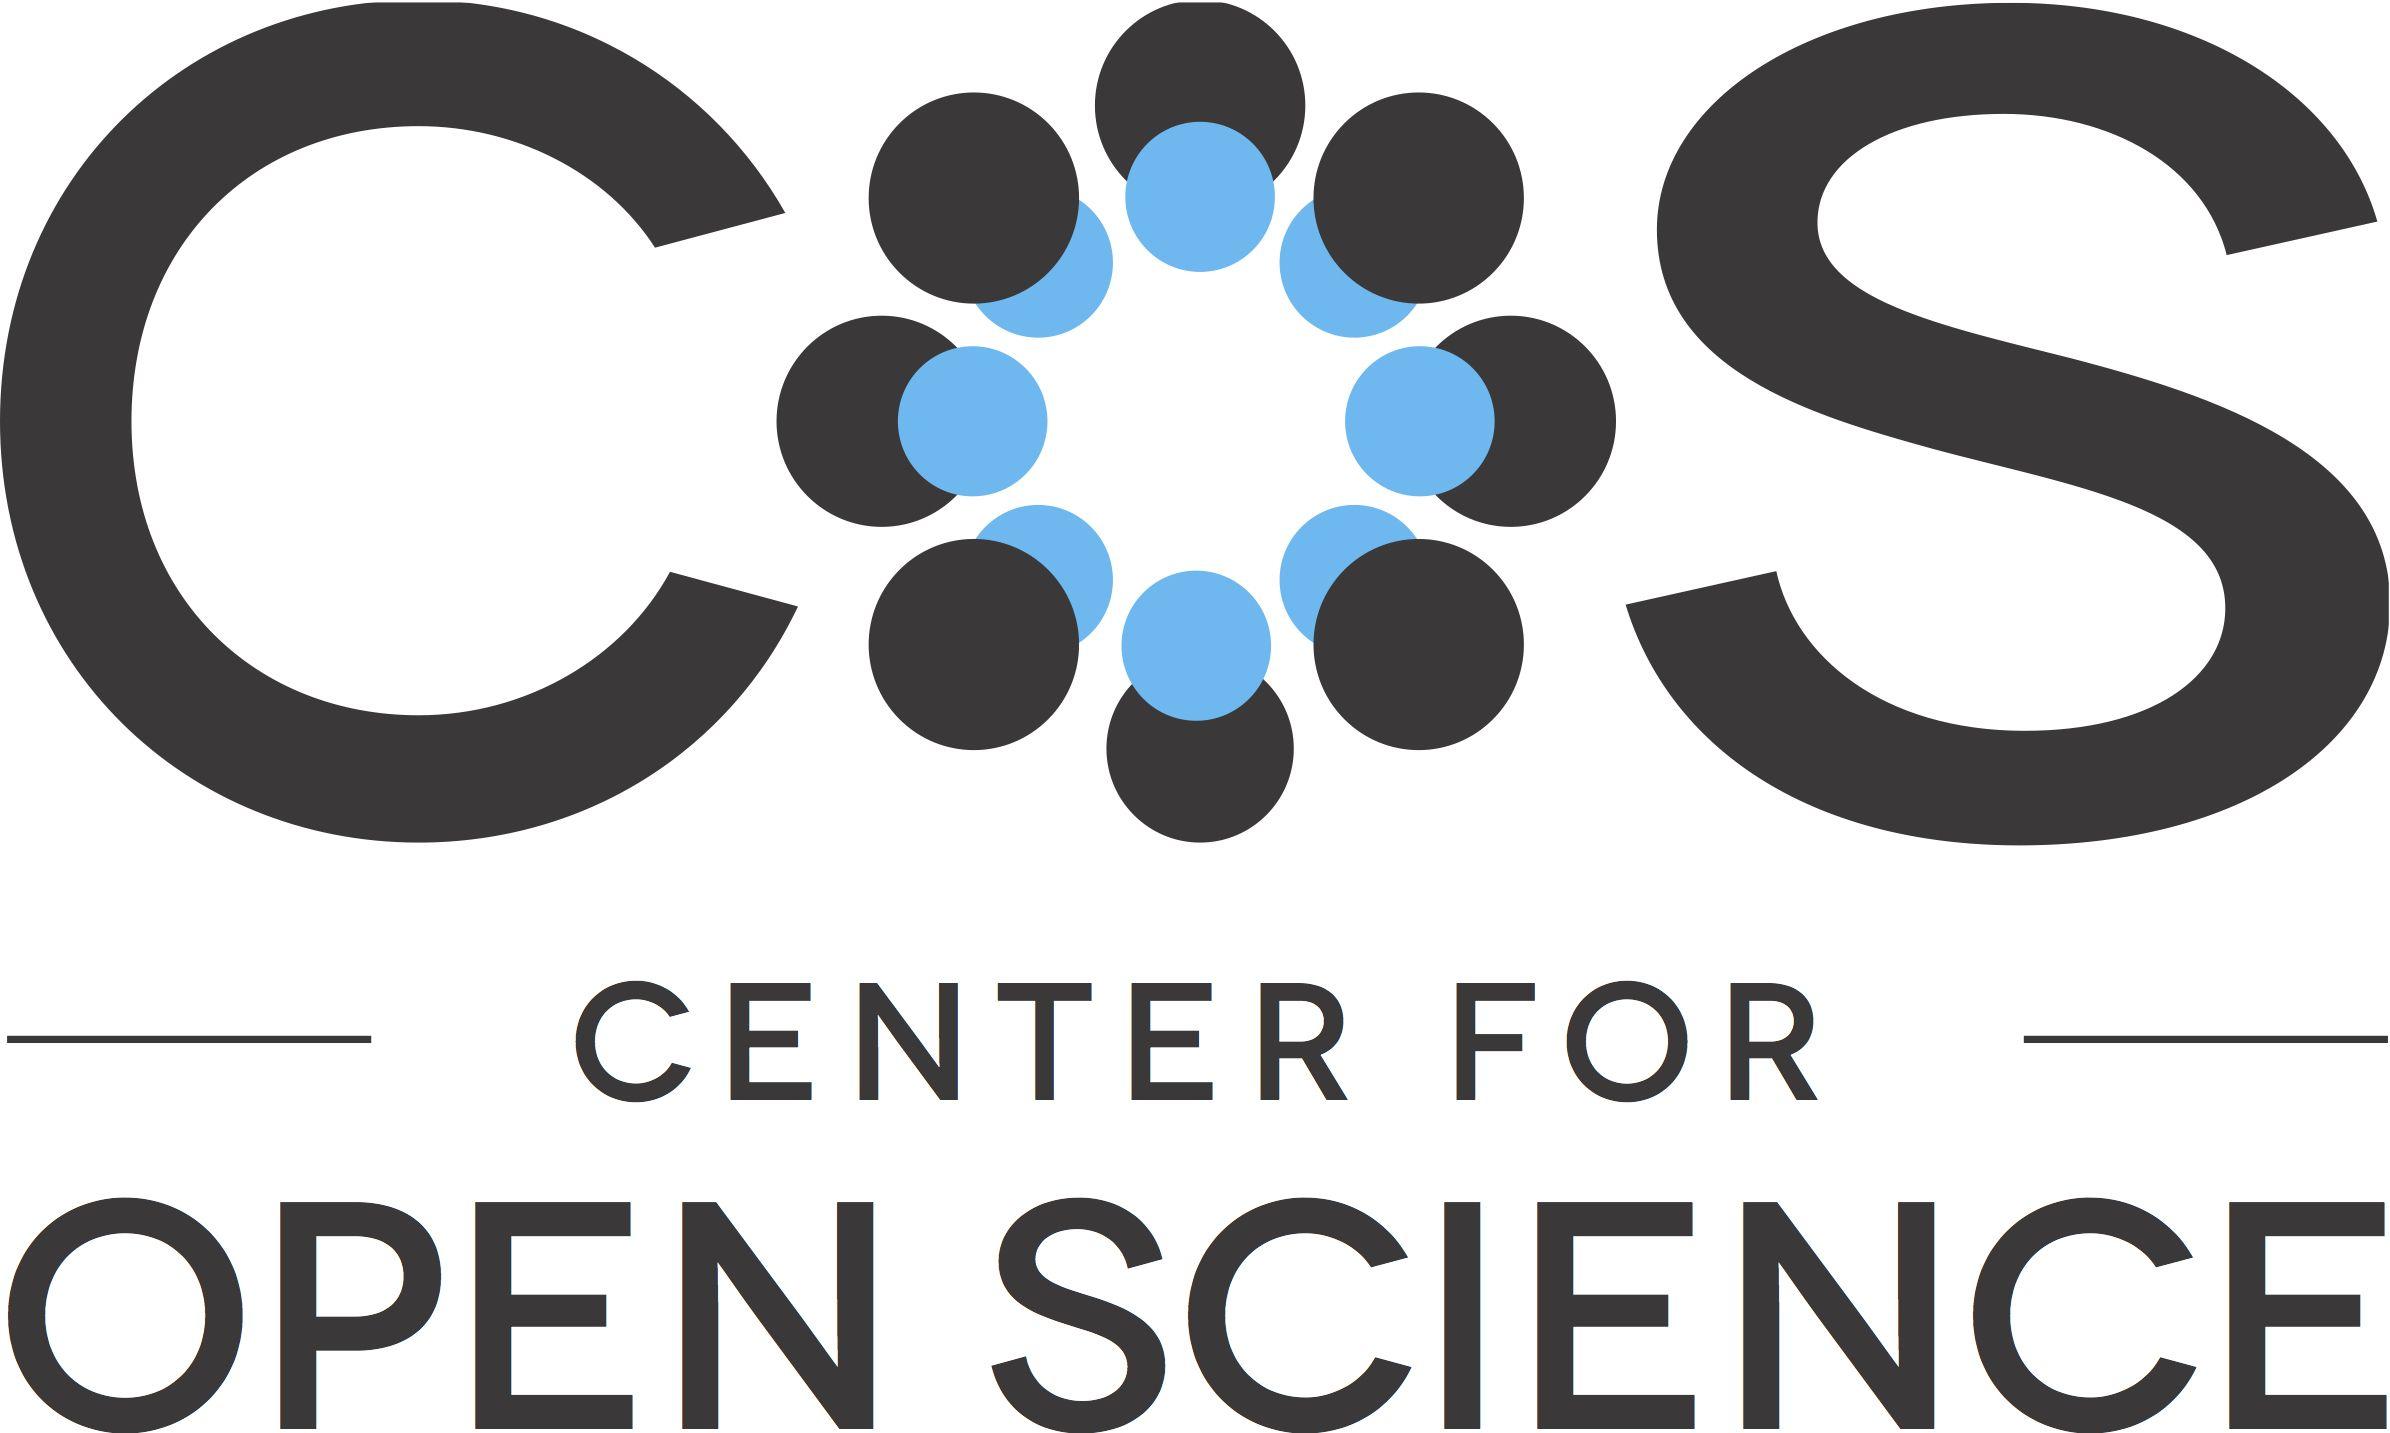 Social Science Logo - Call for better social science research transparency